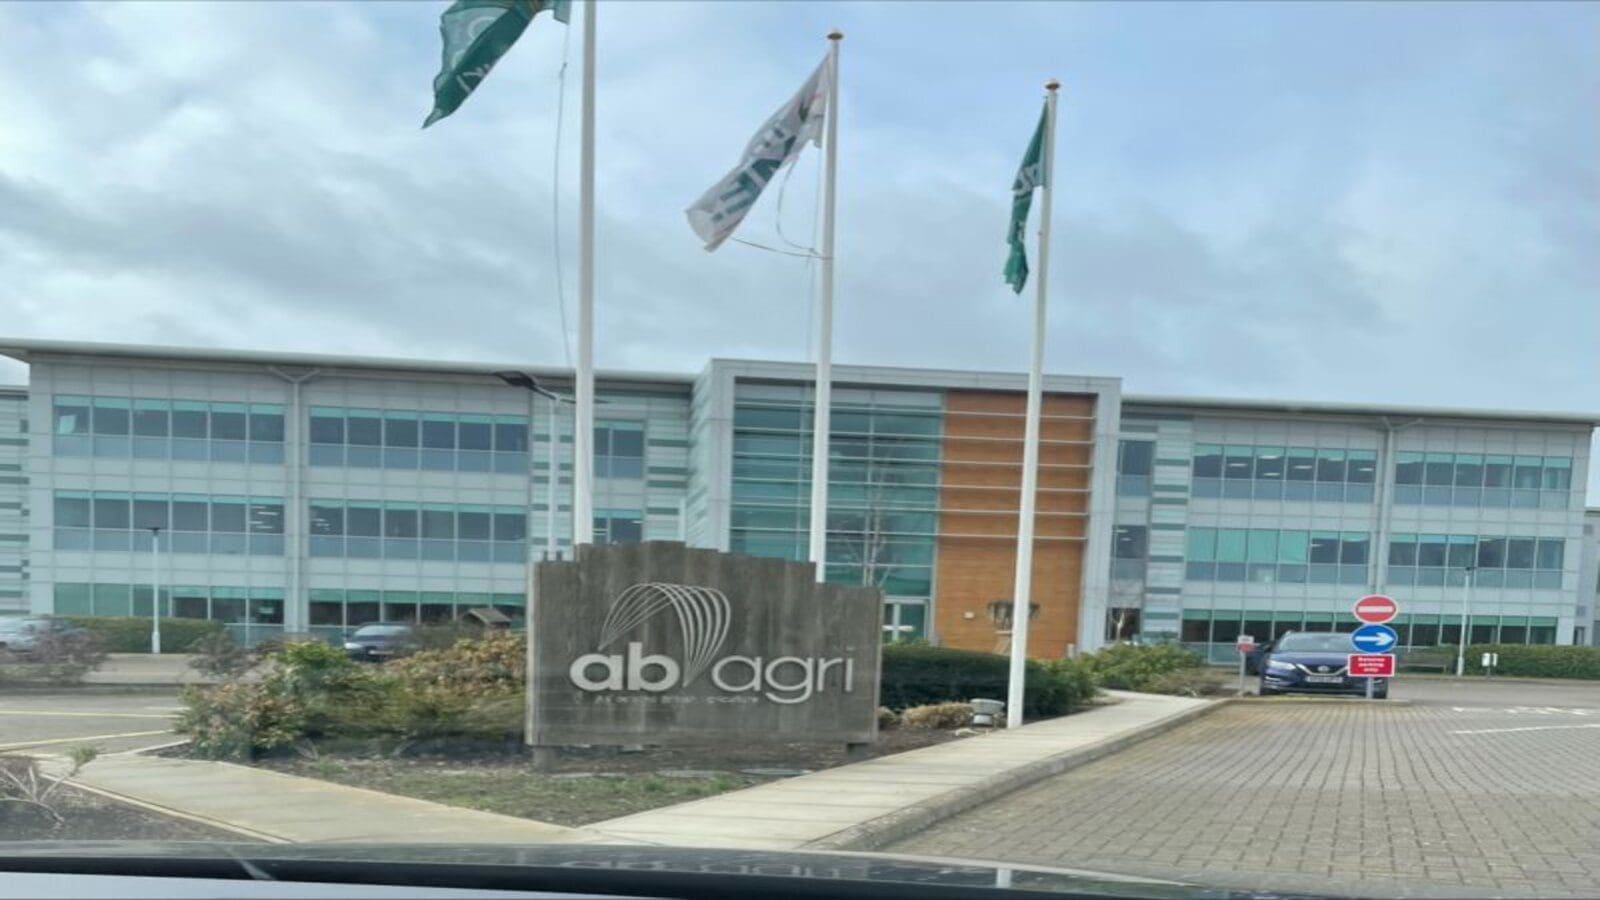 Associated British Foods acquires National Milk Records for US$ 60M to boost its animal feed firm, AB Agri